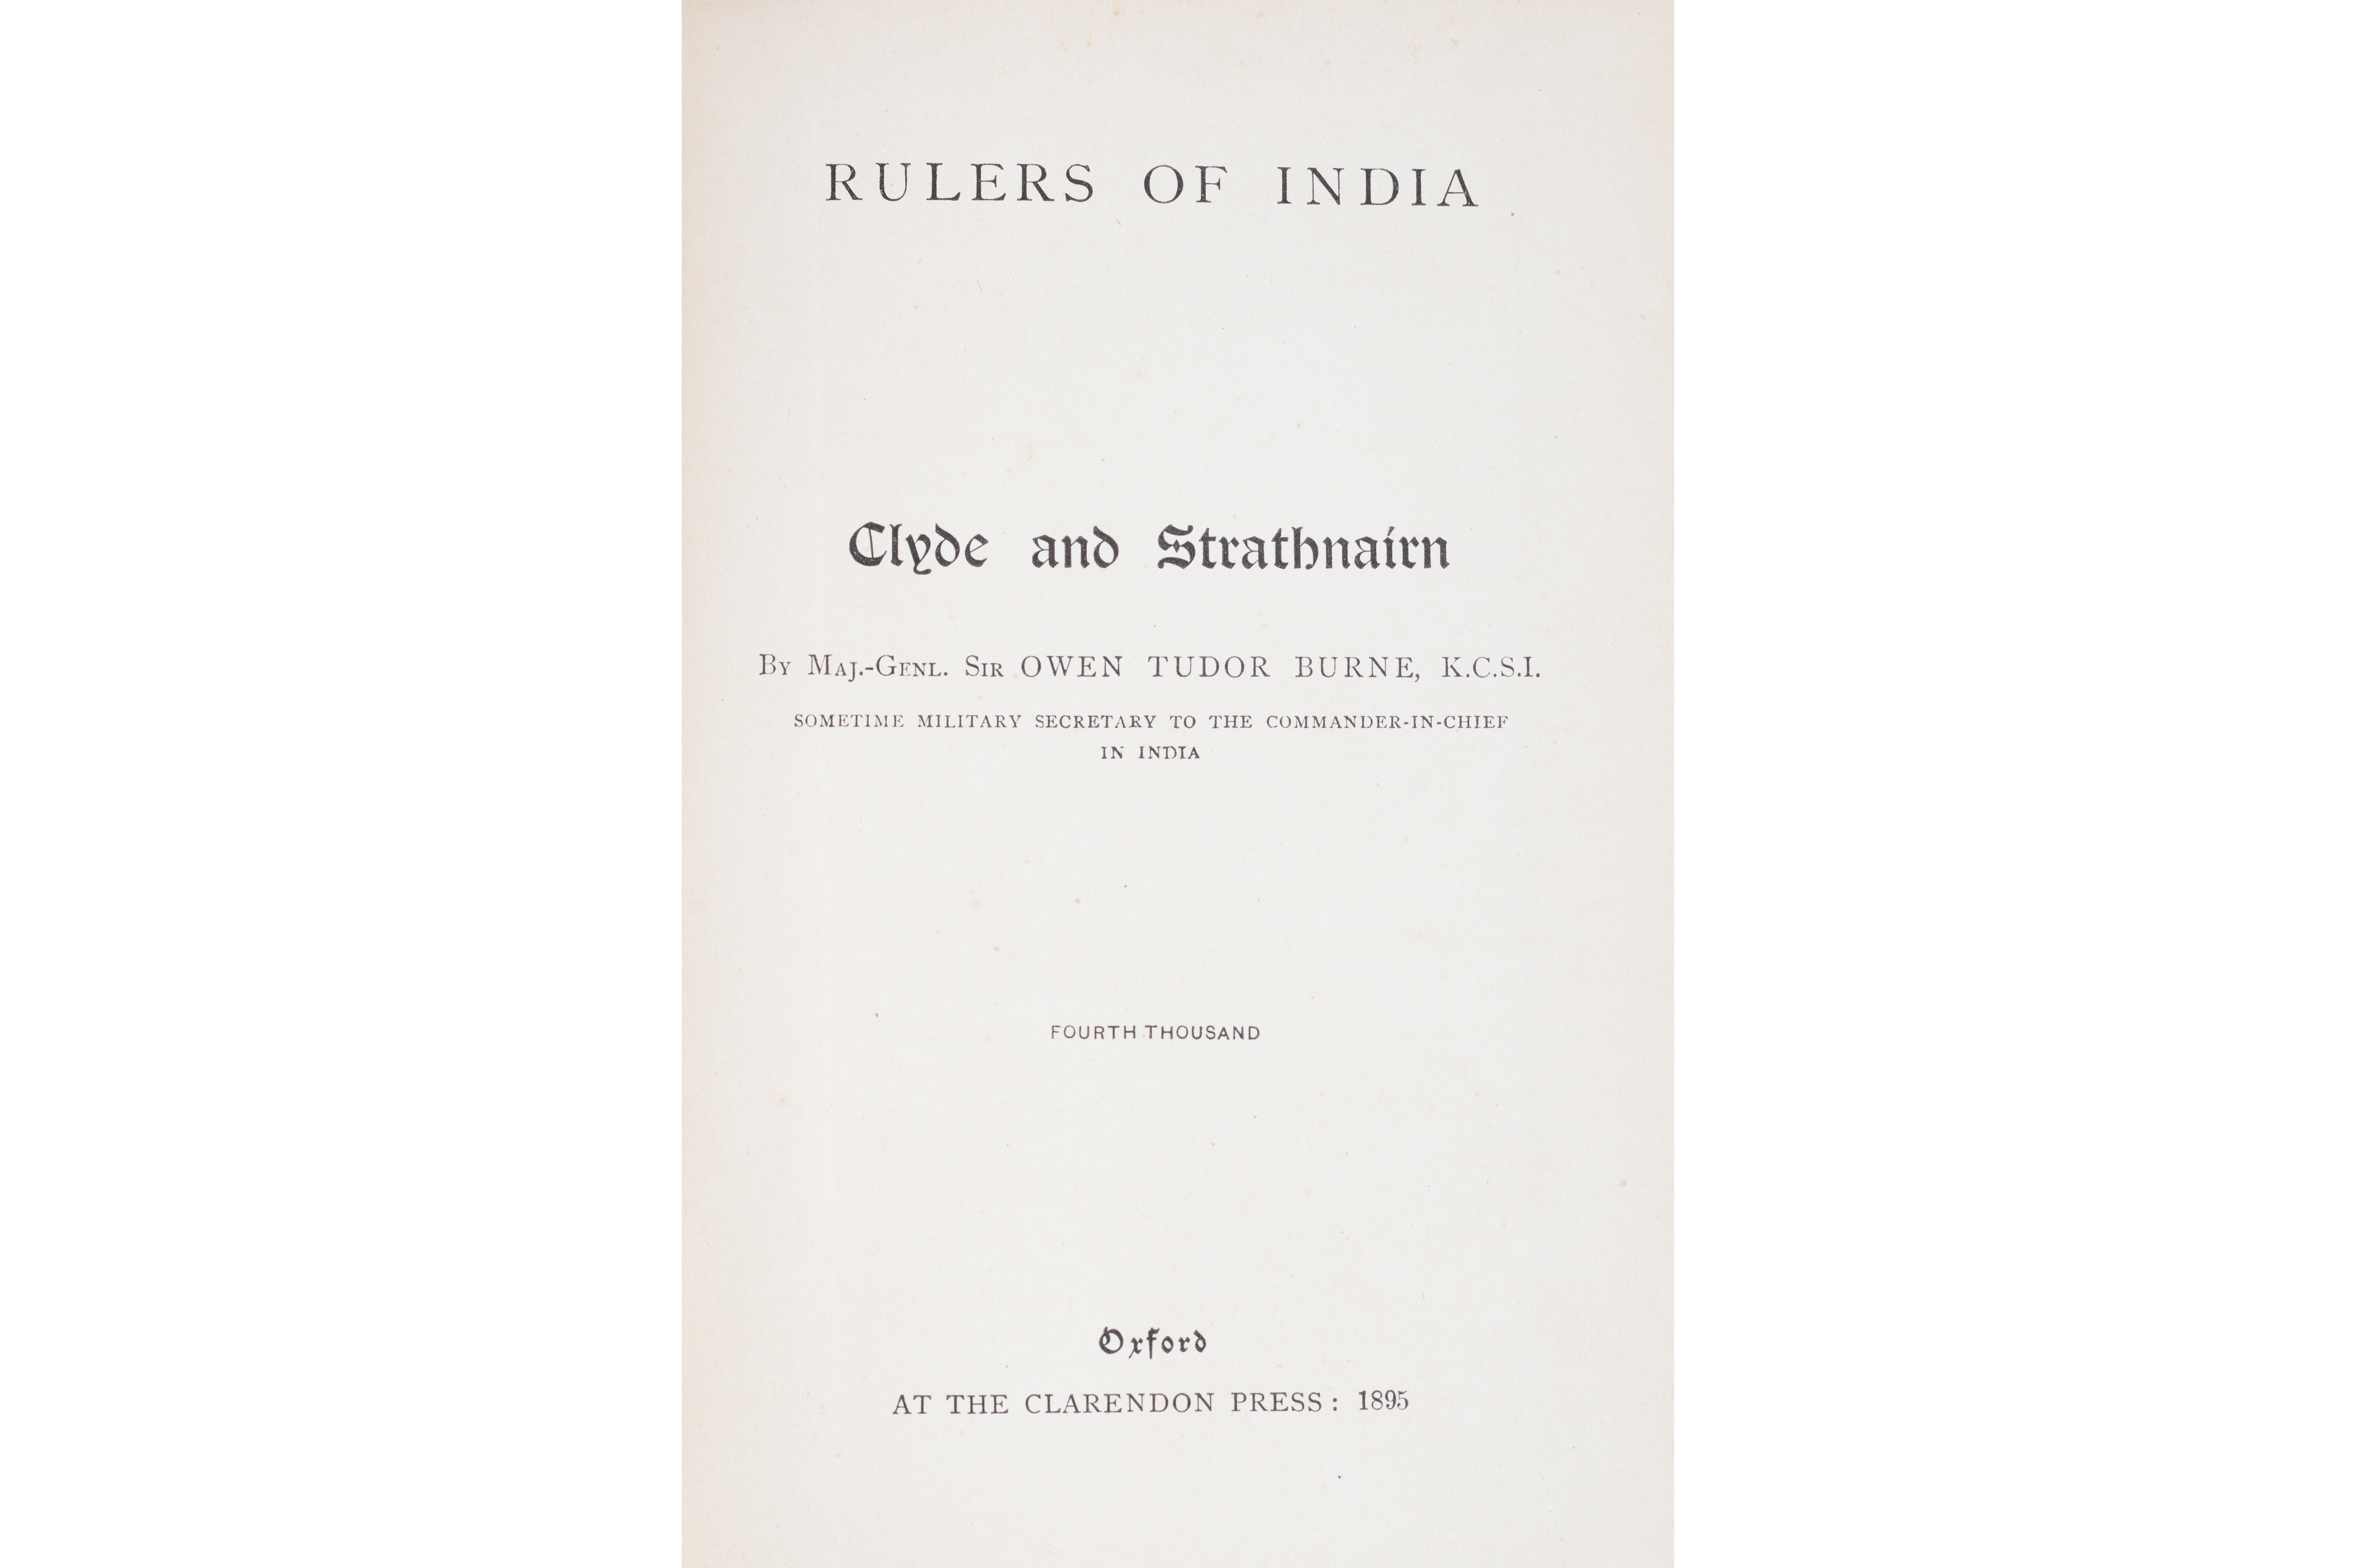 VARIOUS AUTHORS - 'RULERS OF INDIA' - Image 6 of 19